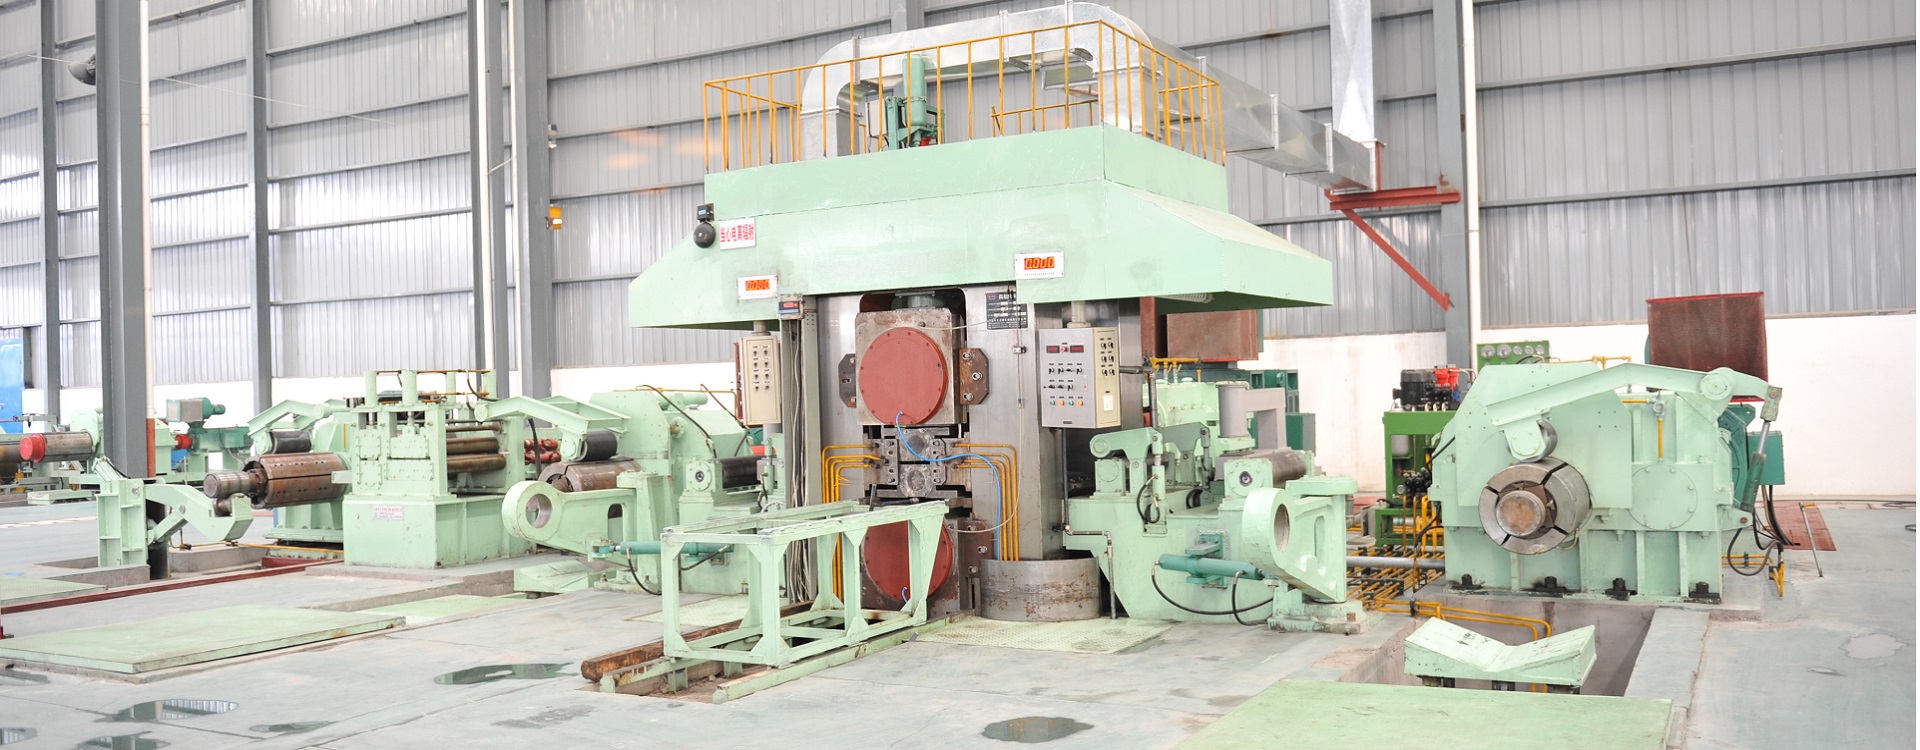 cold rolling mill, reversing cold rolling mill, 4 hi cold rolling mill - DLS